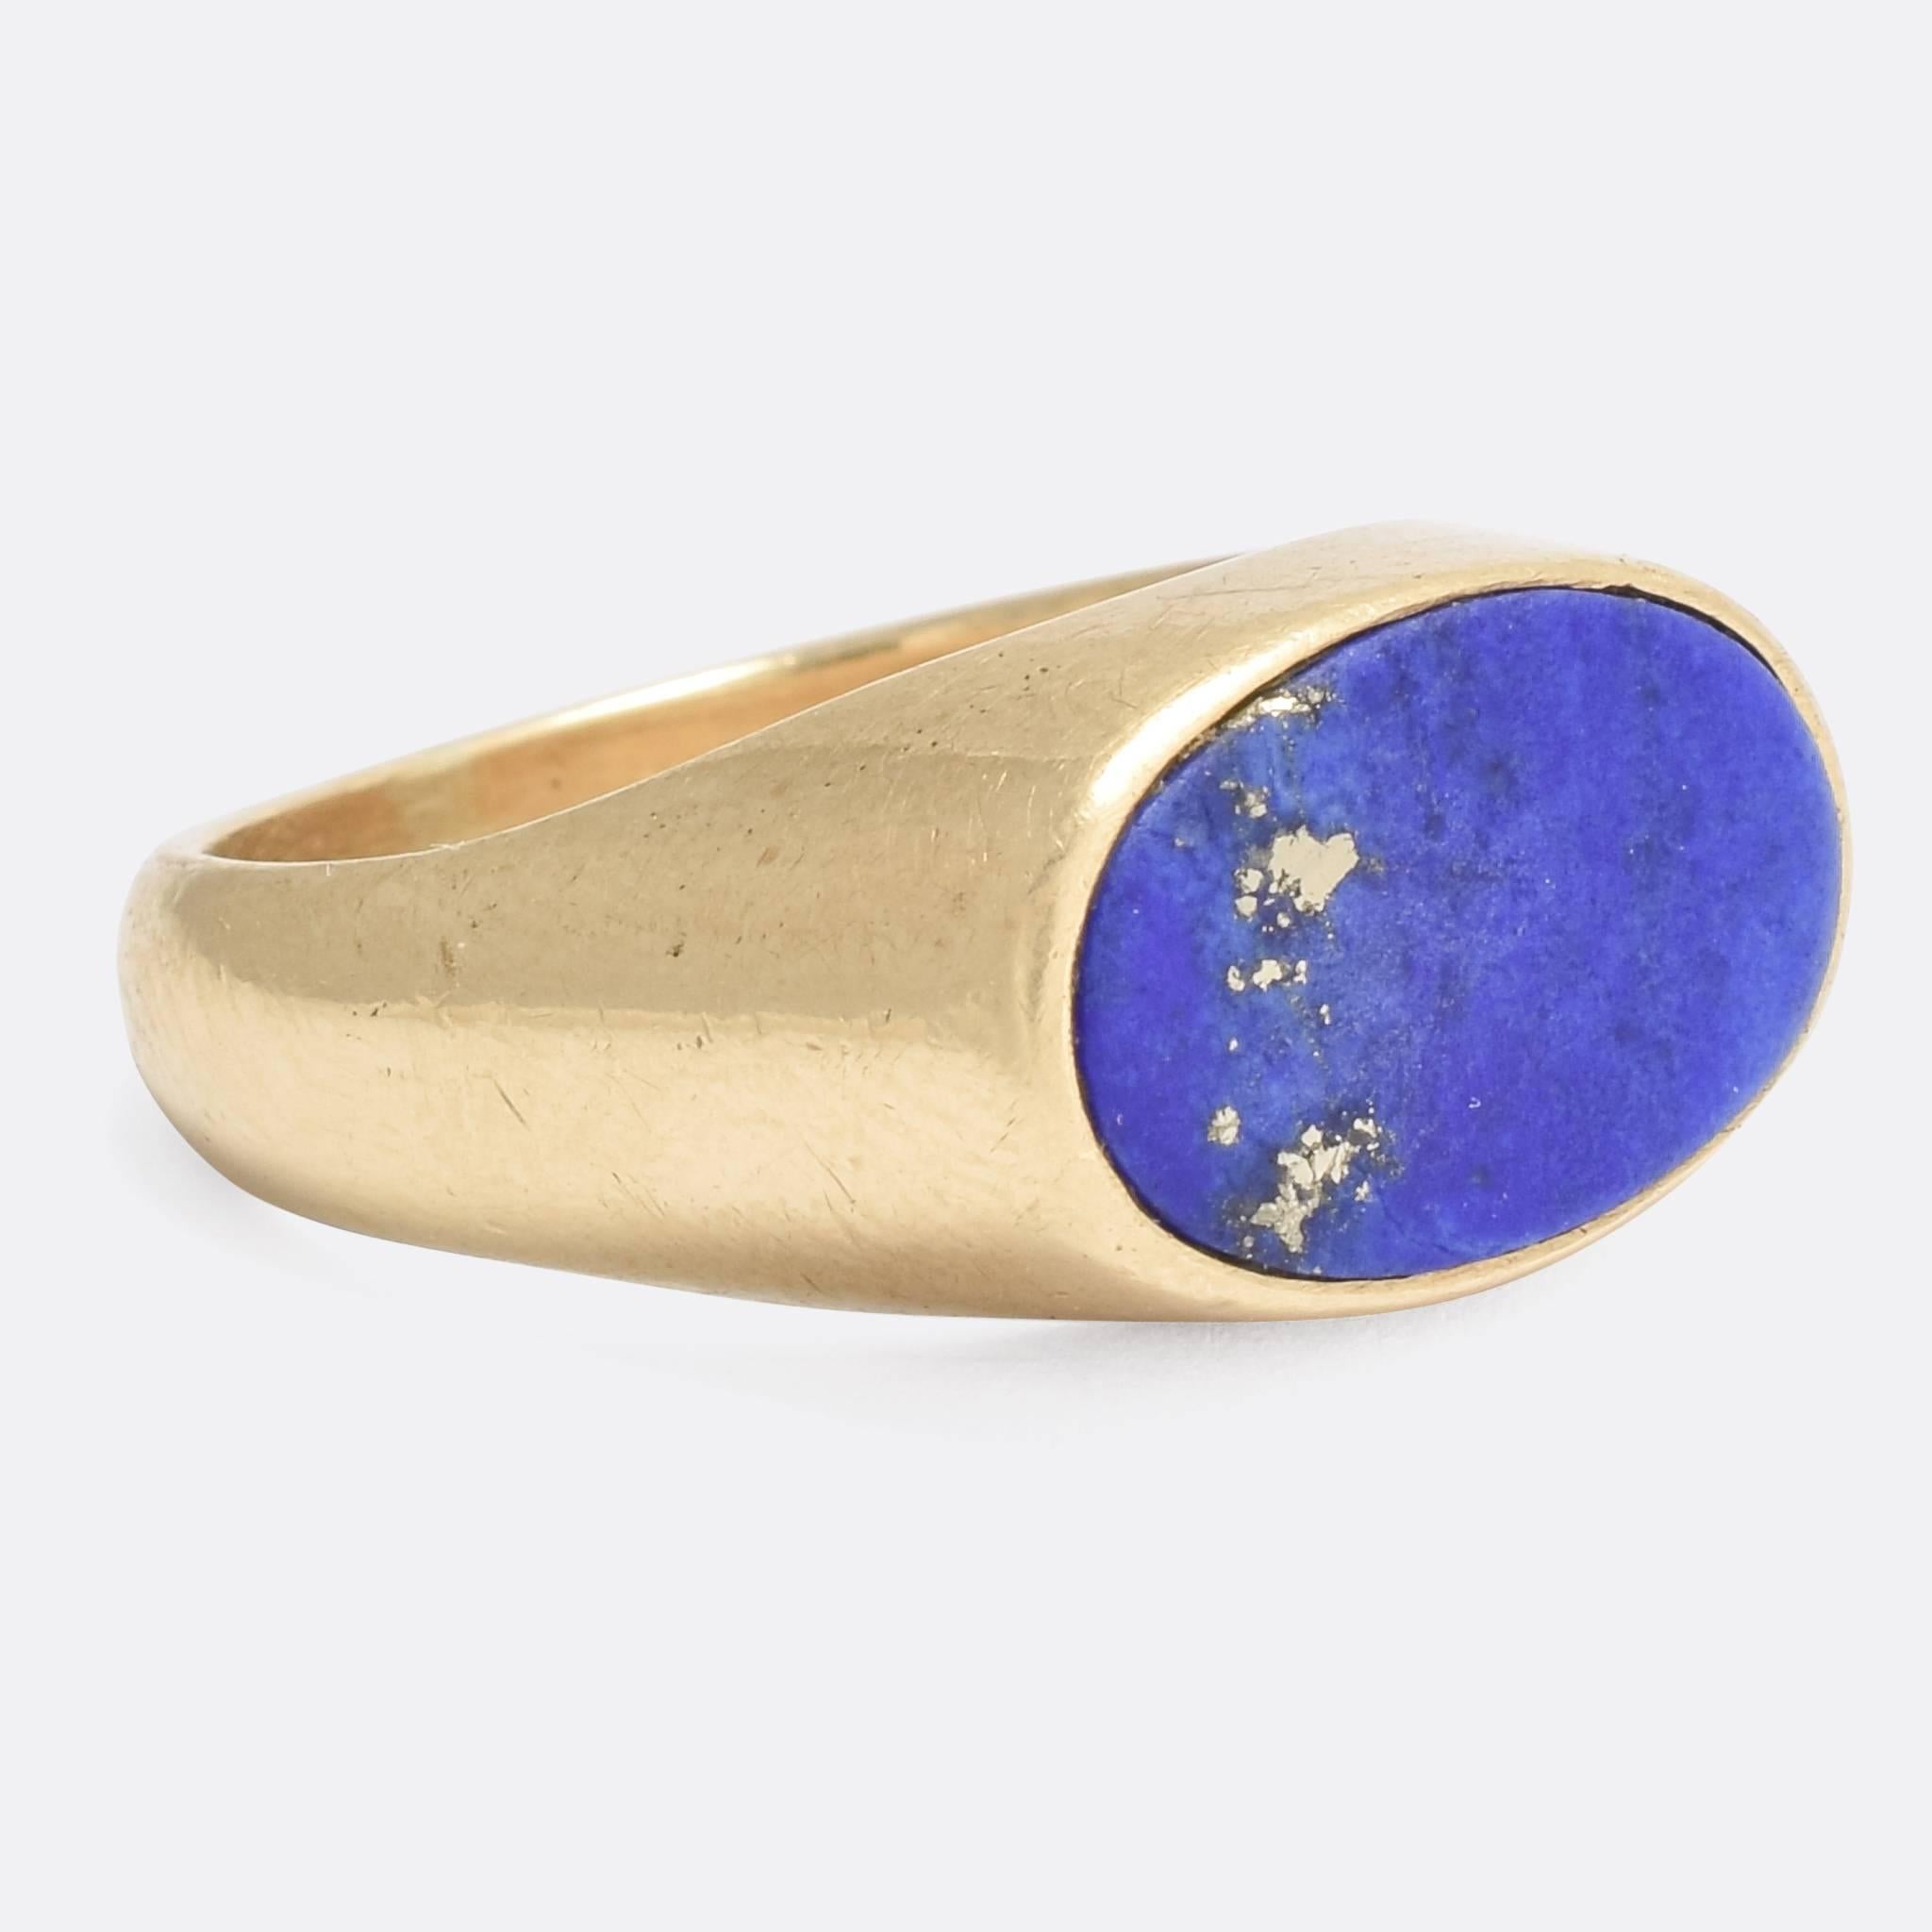 A cool vintage signet ring, that echoes the modernist styles of the mid-20th Century. It's set with an oval Lapis lazuli panel, a beautiful contrast to the yellow gold of the mount. Modelled in 9k gold throughout, with clear London hallmarks dating